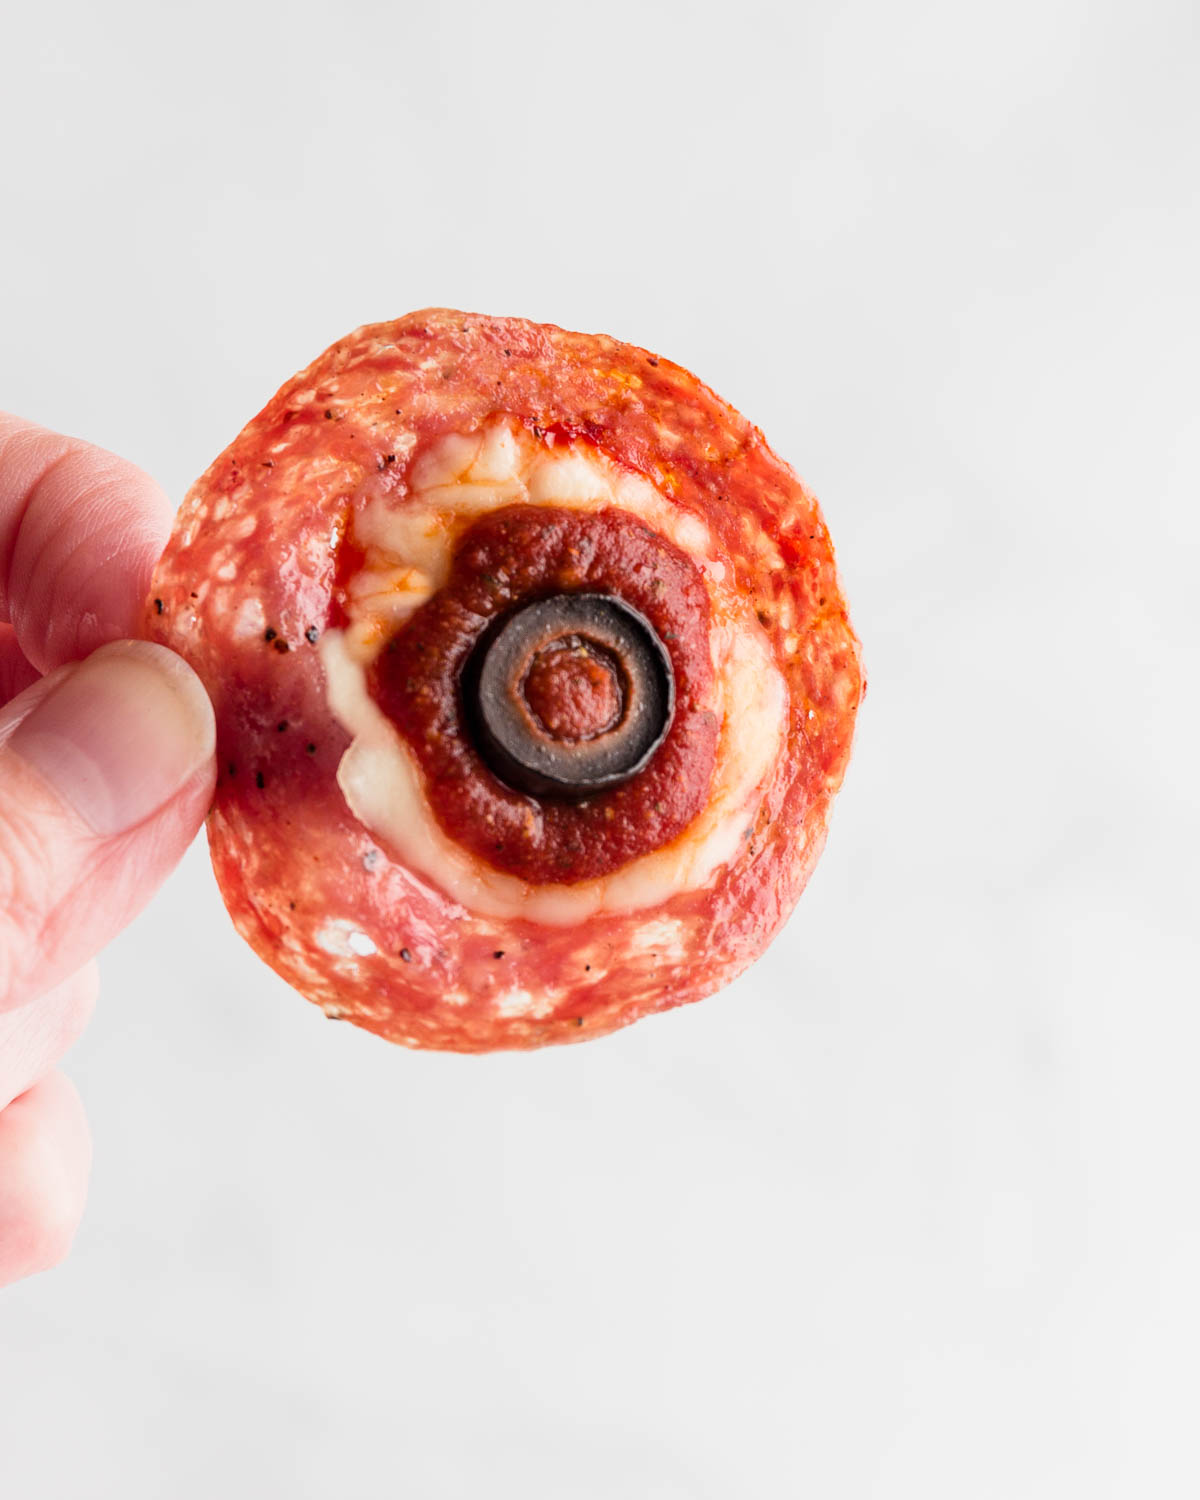 A  low carb Pizza Eyeball Snack.